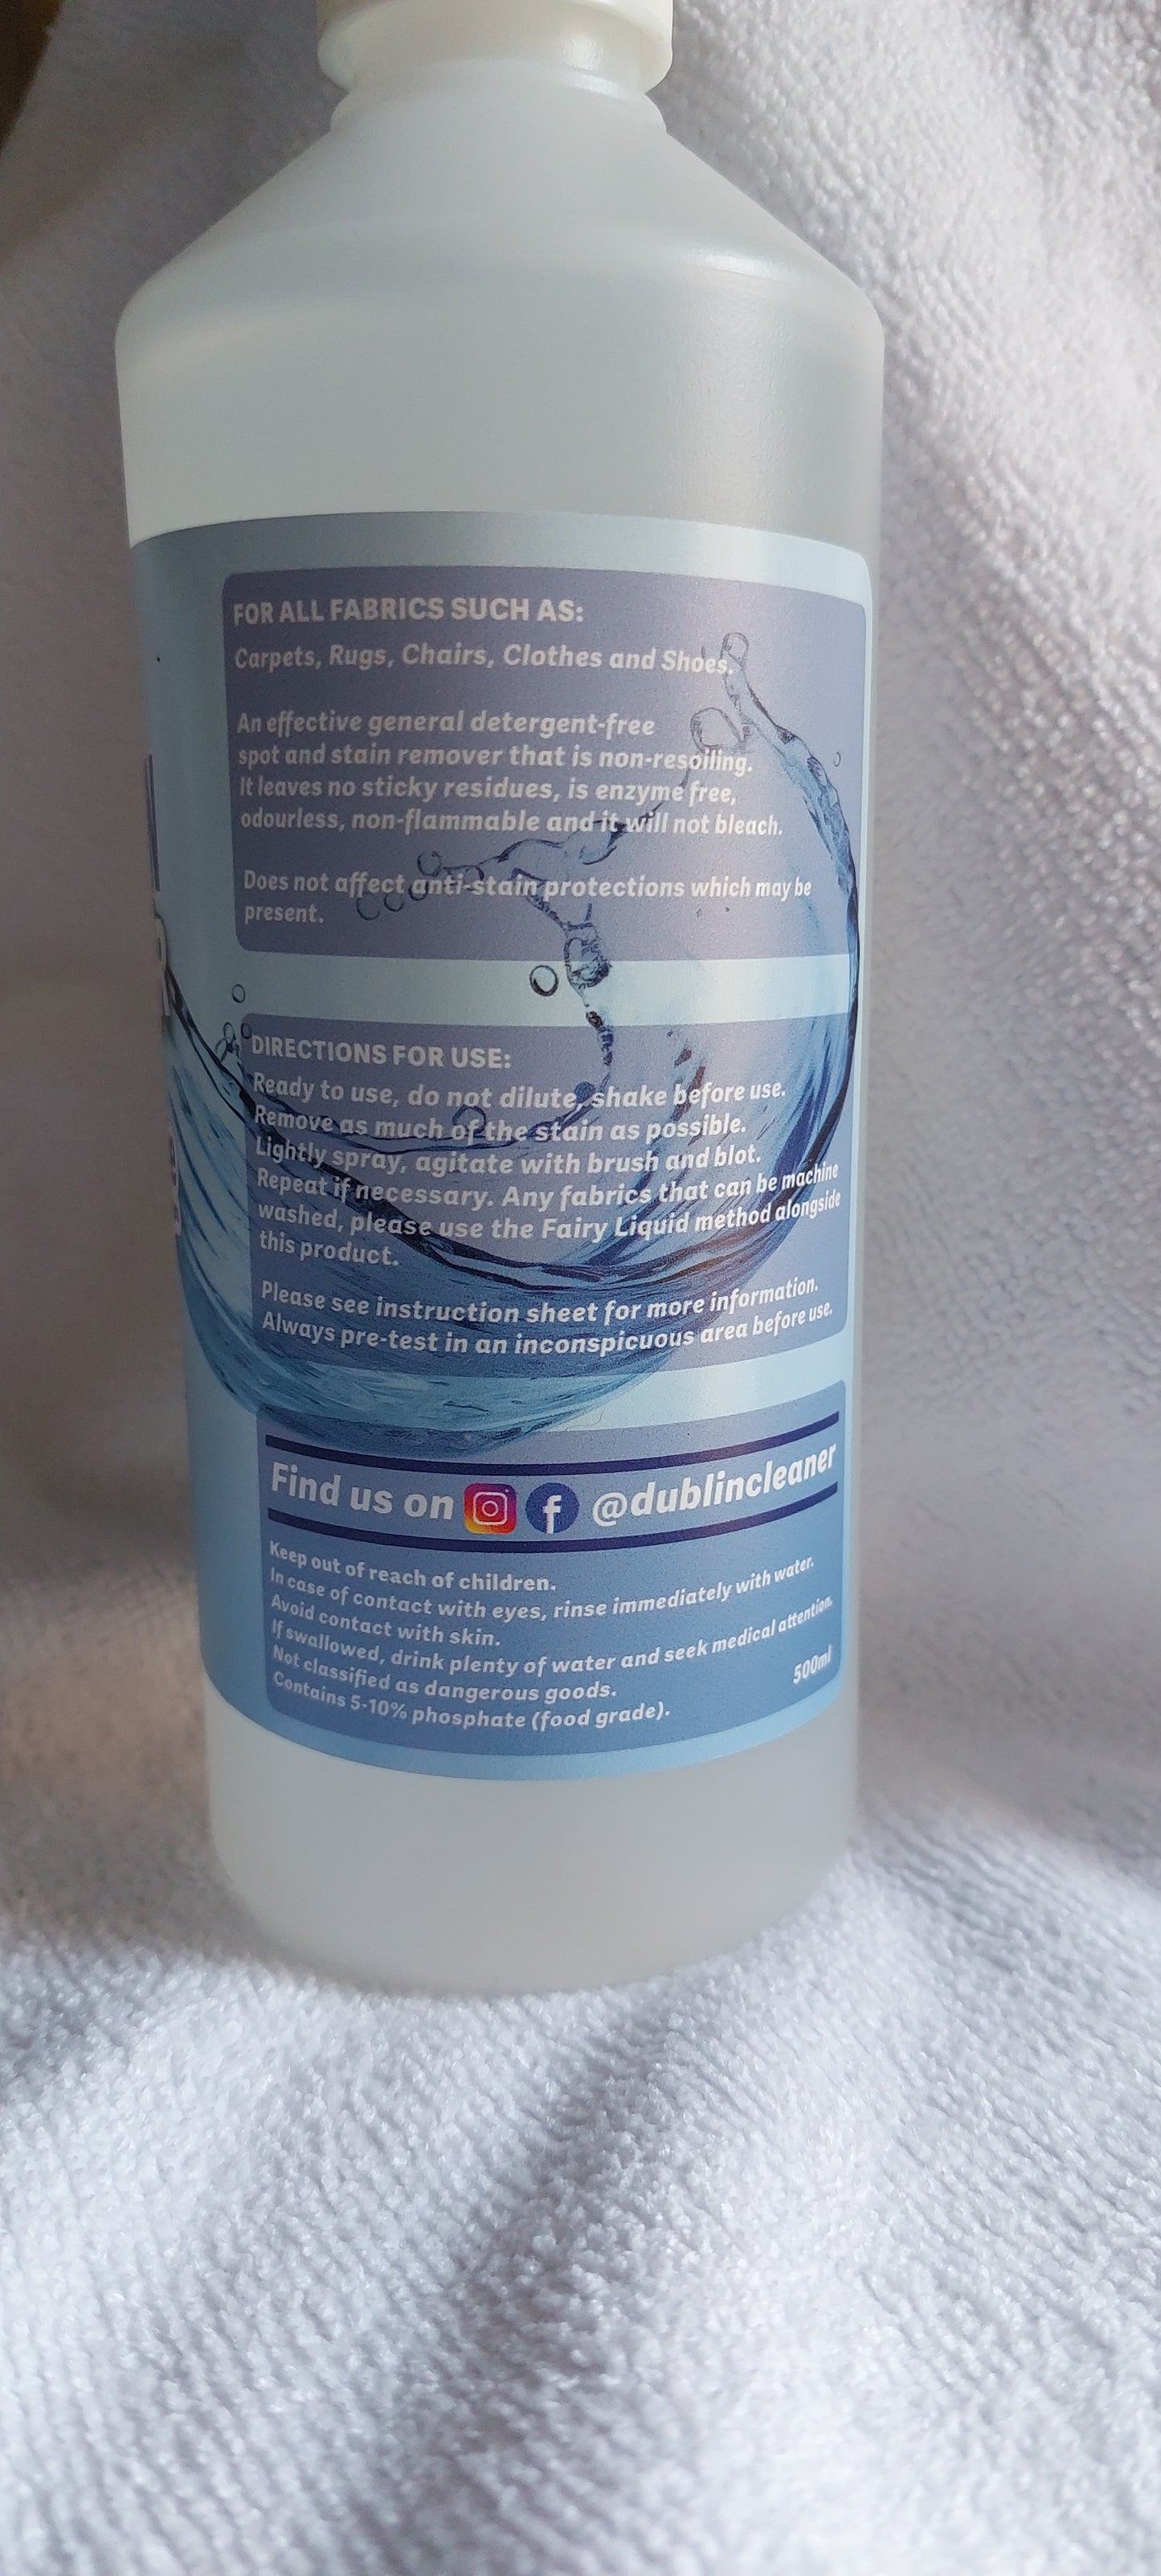 500ml Spot Stain Remover ONLY without Nozzle or Instruction sheet